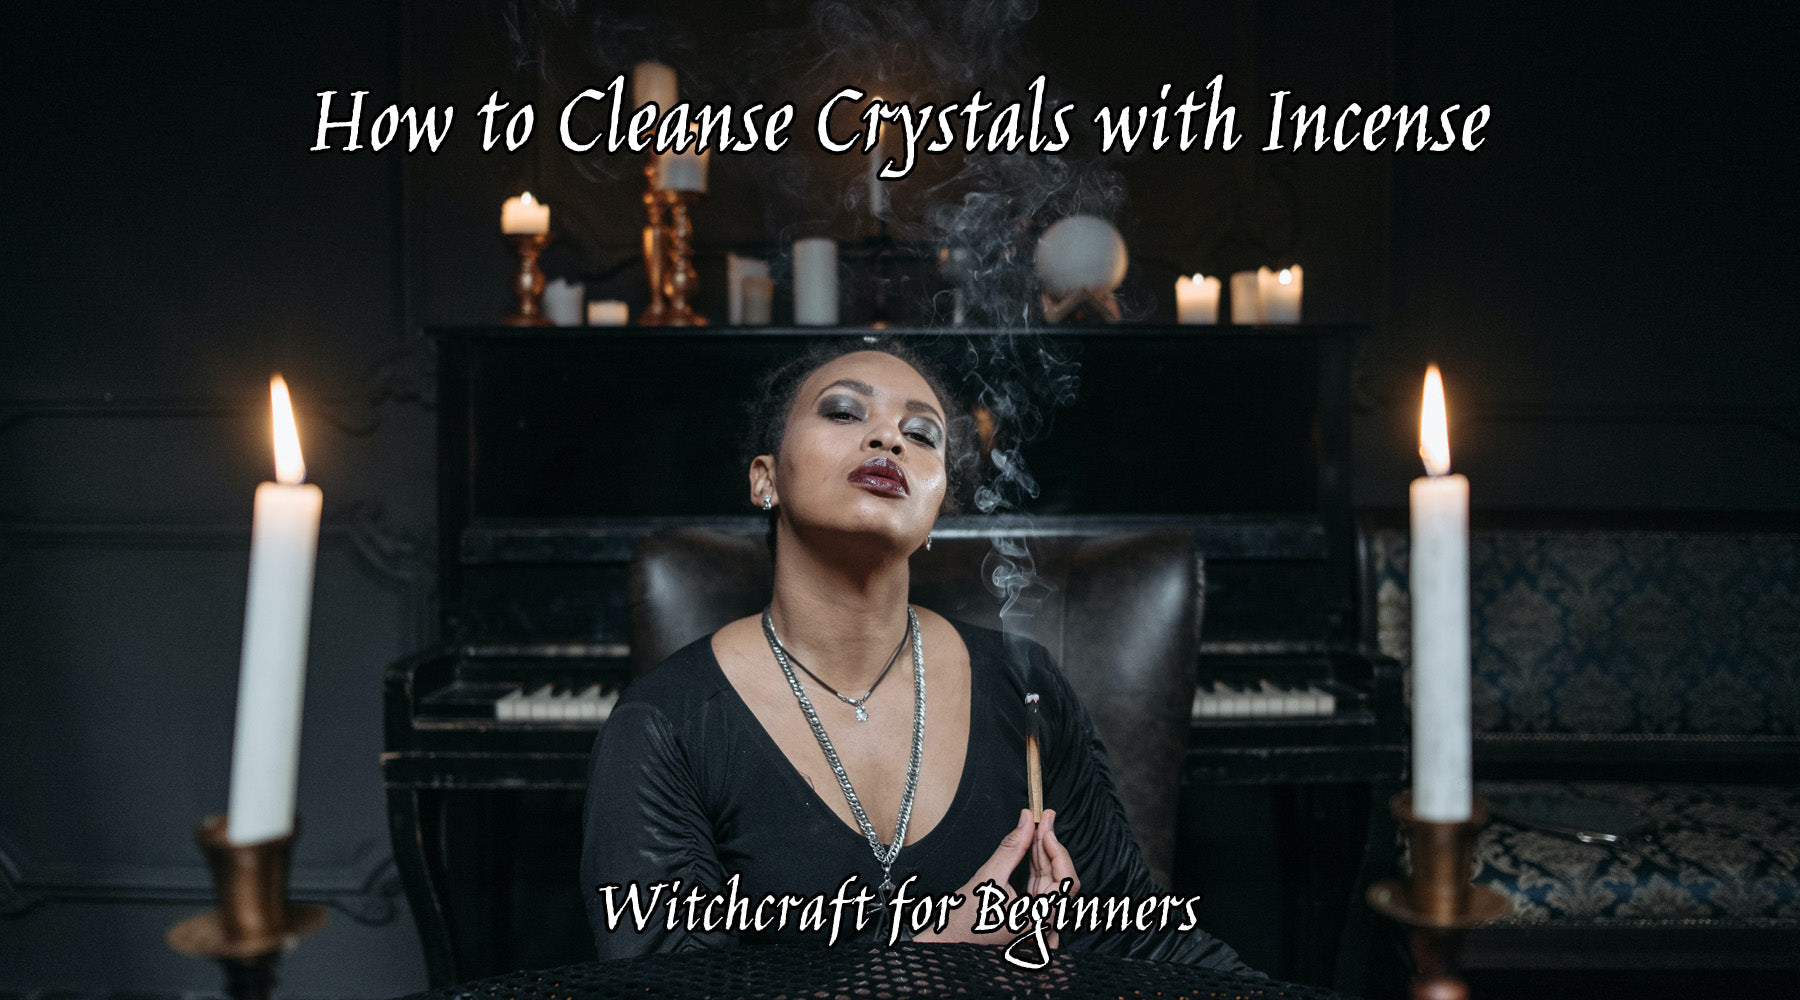 How to Cleanse Crystals with Incense